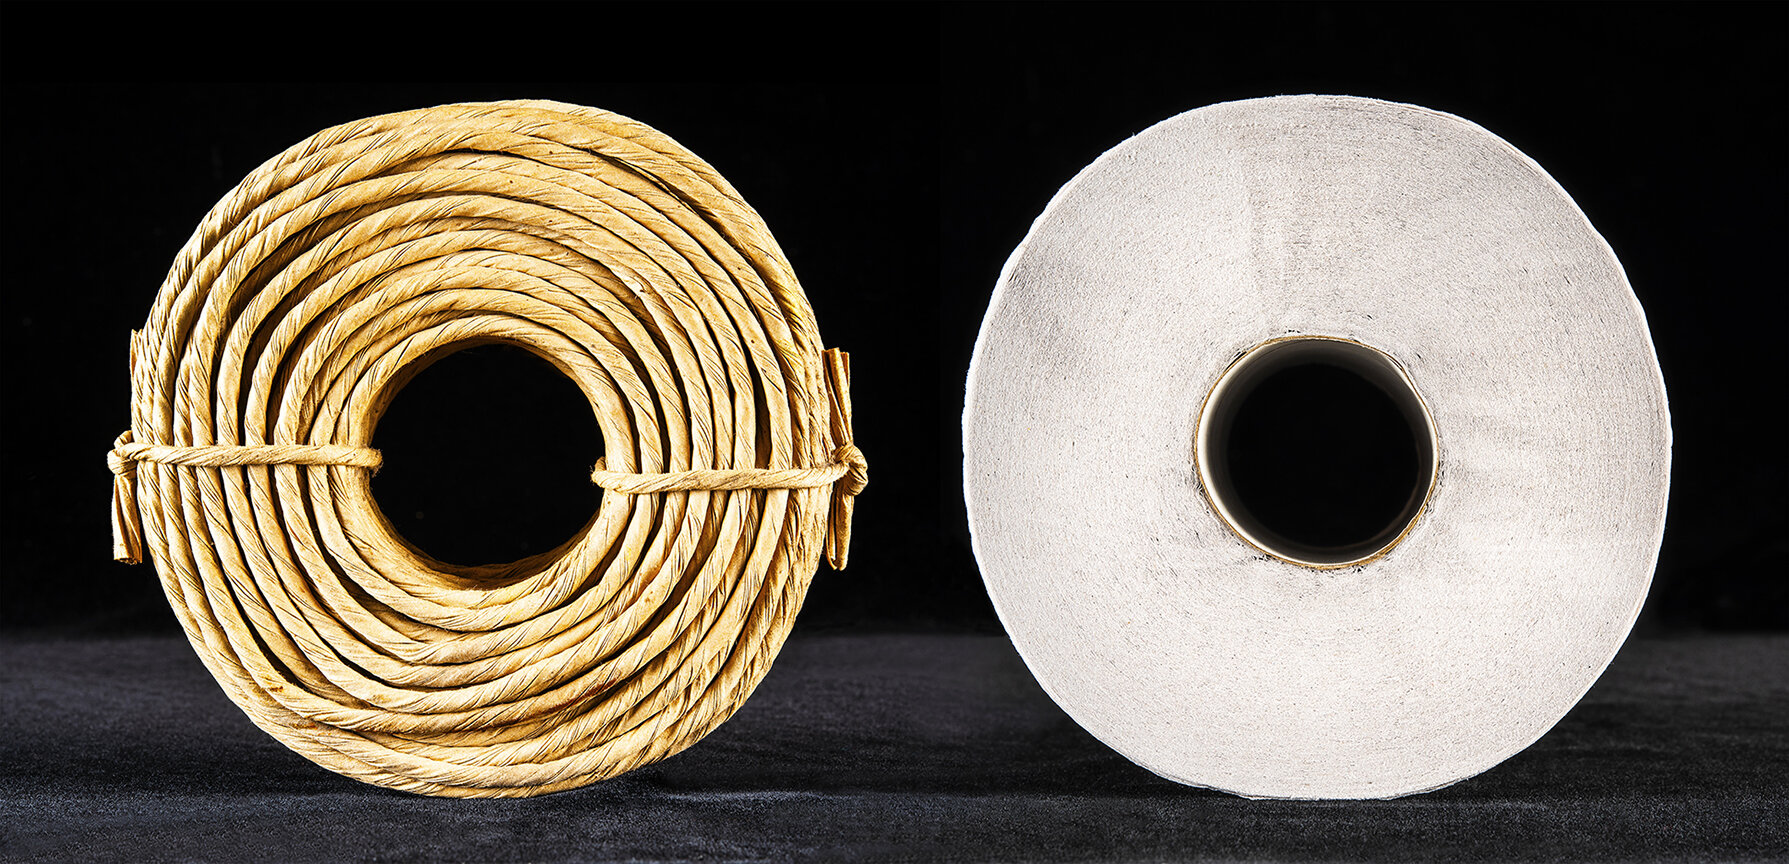    Duologue    The Bizarre Tale of a Roll of Twine  and a Roll of Toilet Paper   2020 (Found objects)  45cm x 93cm  Archival pigment print on 310gsm cotton rag paper    